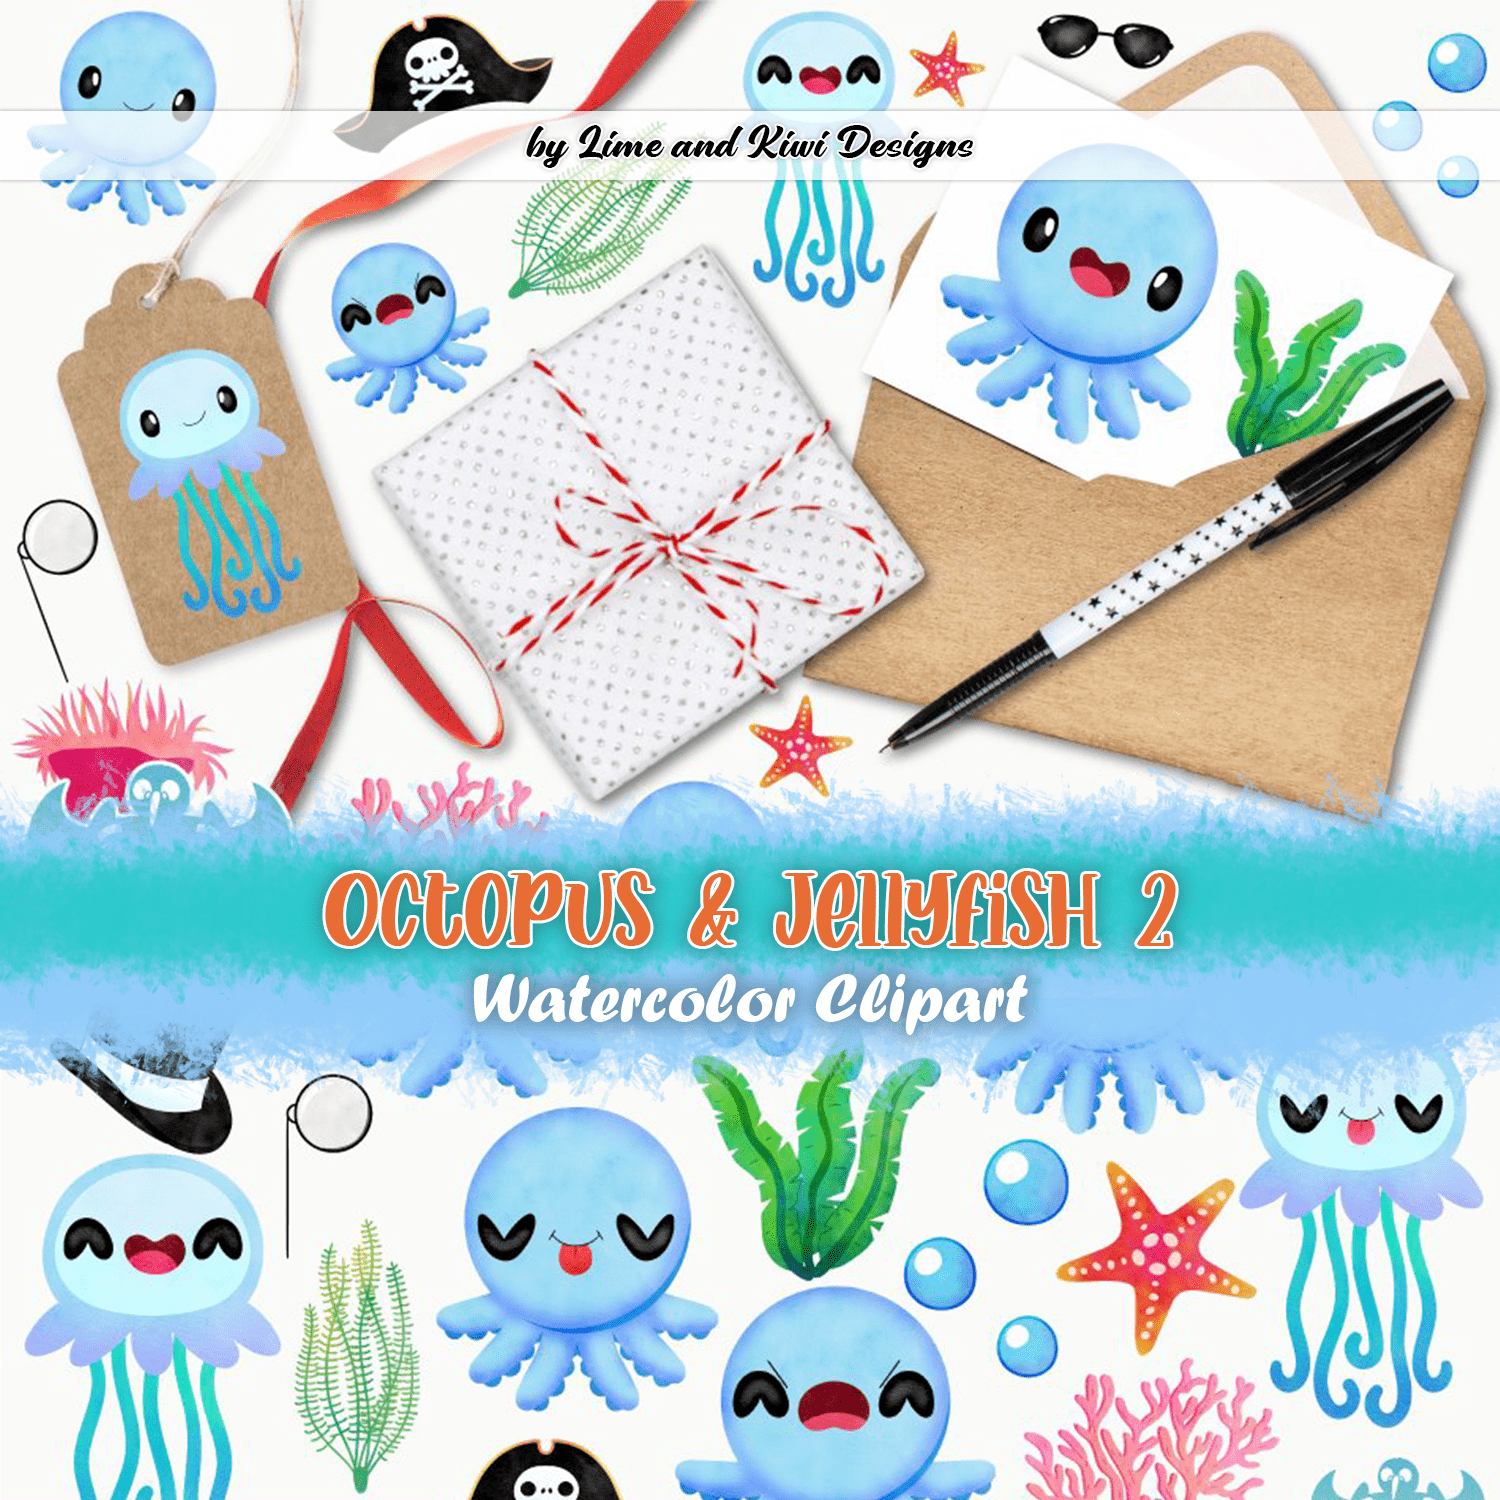 Octopus & Jellyfish 2 Watercolor Clipart, Instant Download cover.